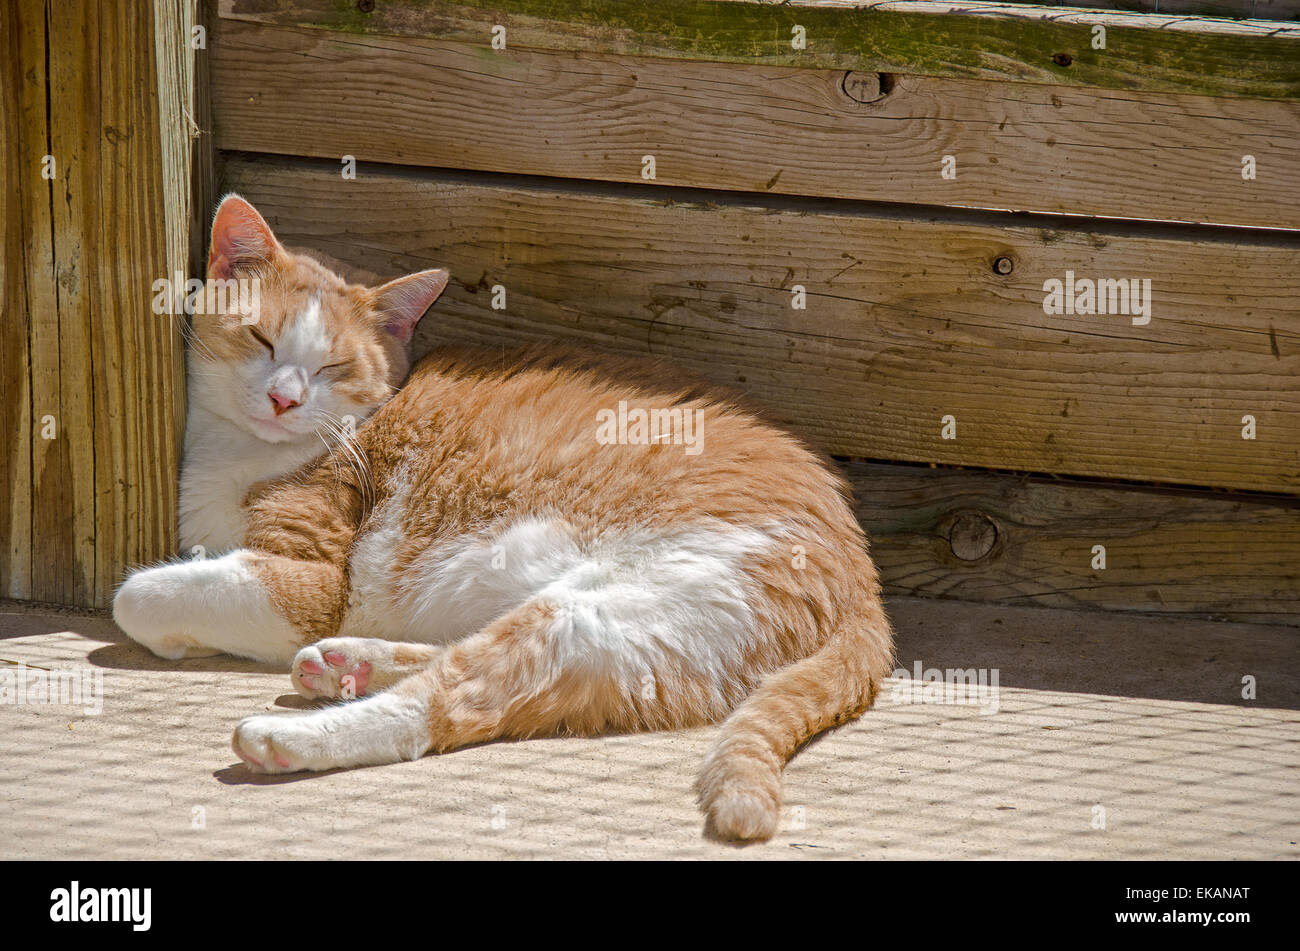 Tabby cat napping in warm sunshine leaning against a wooden post. Stock Photo